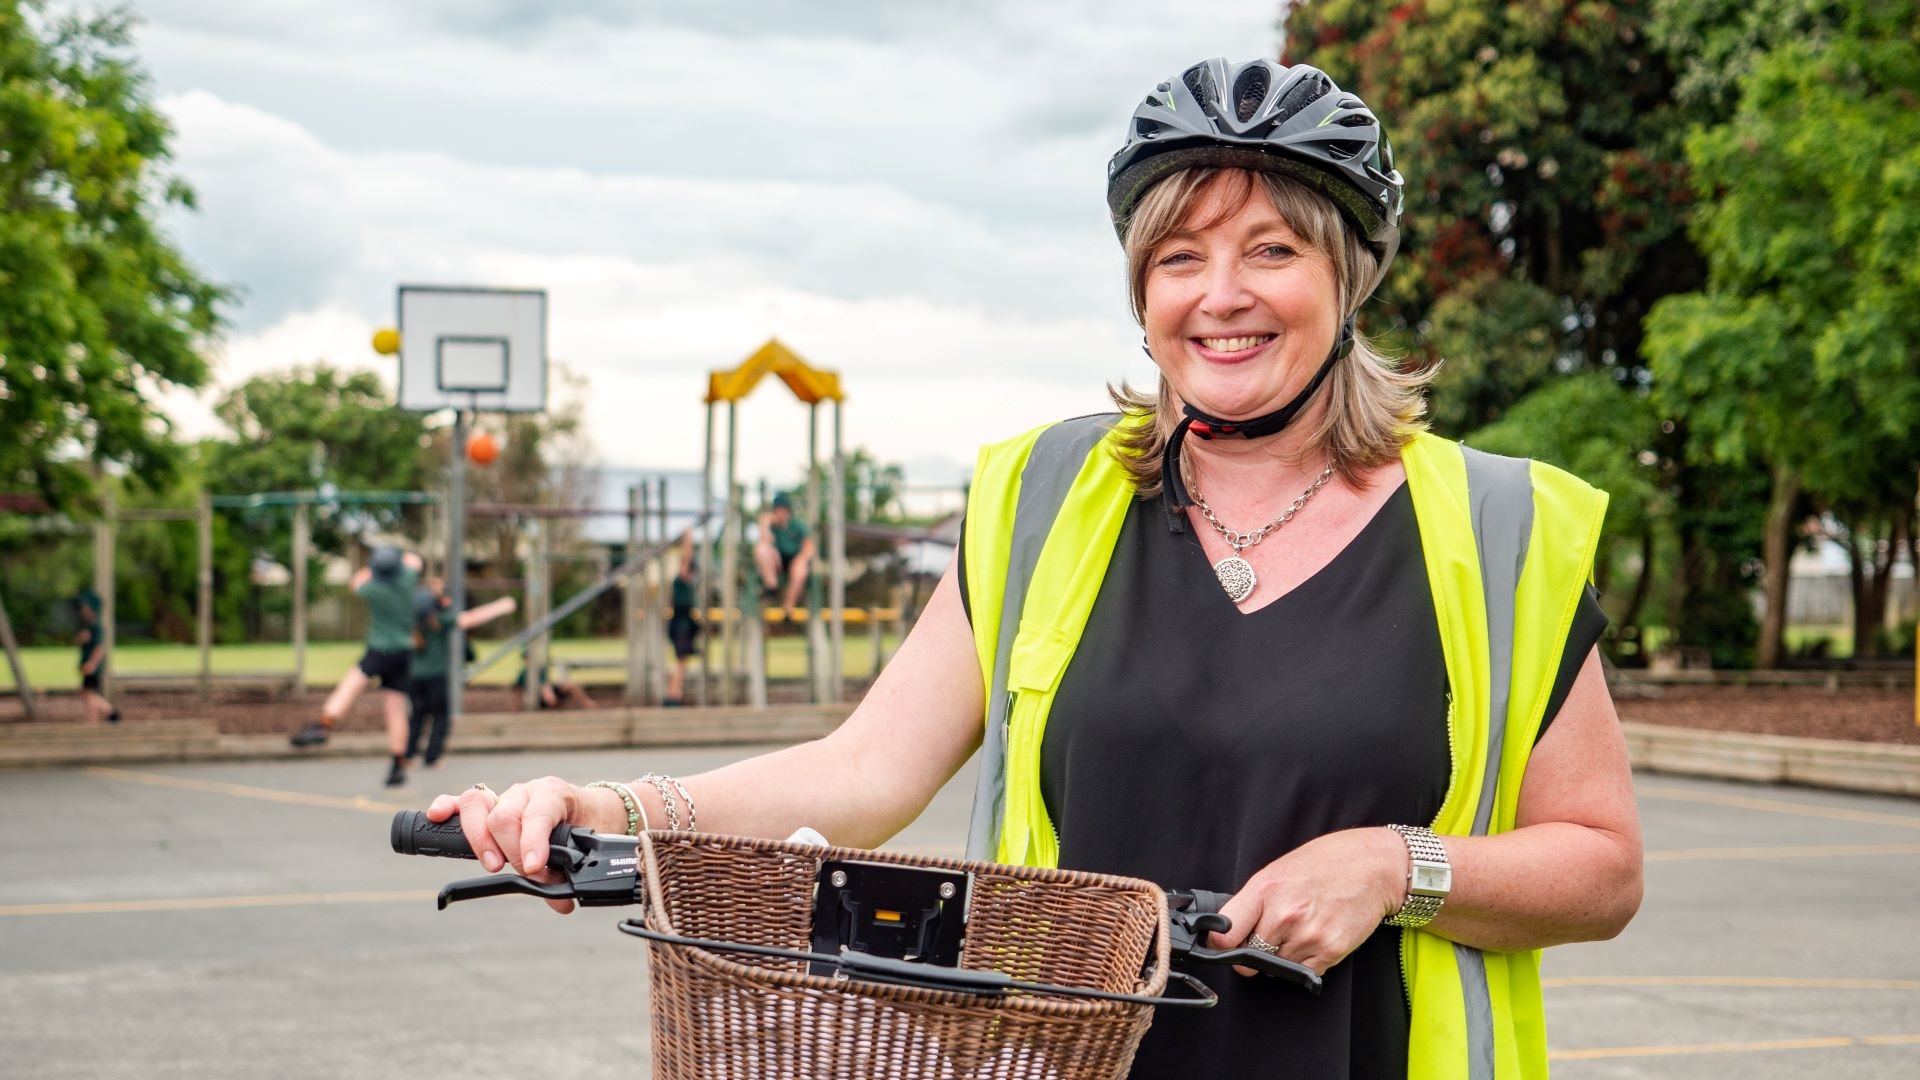 Photo shows smiling woman in helmet and hi vis holding bike with a wicker basket on the front.